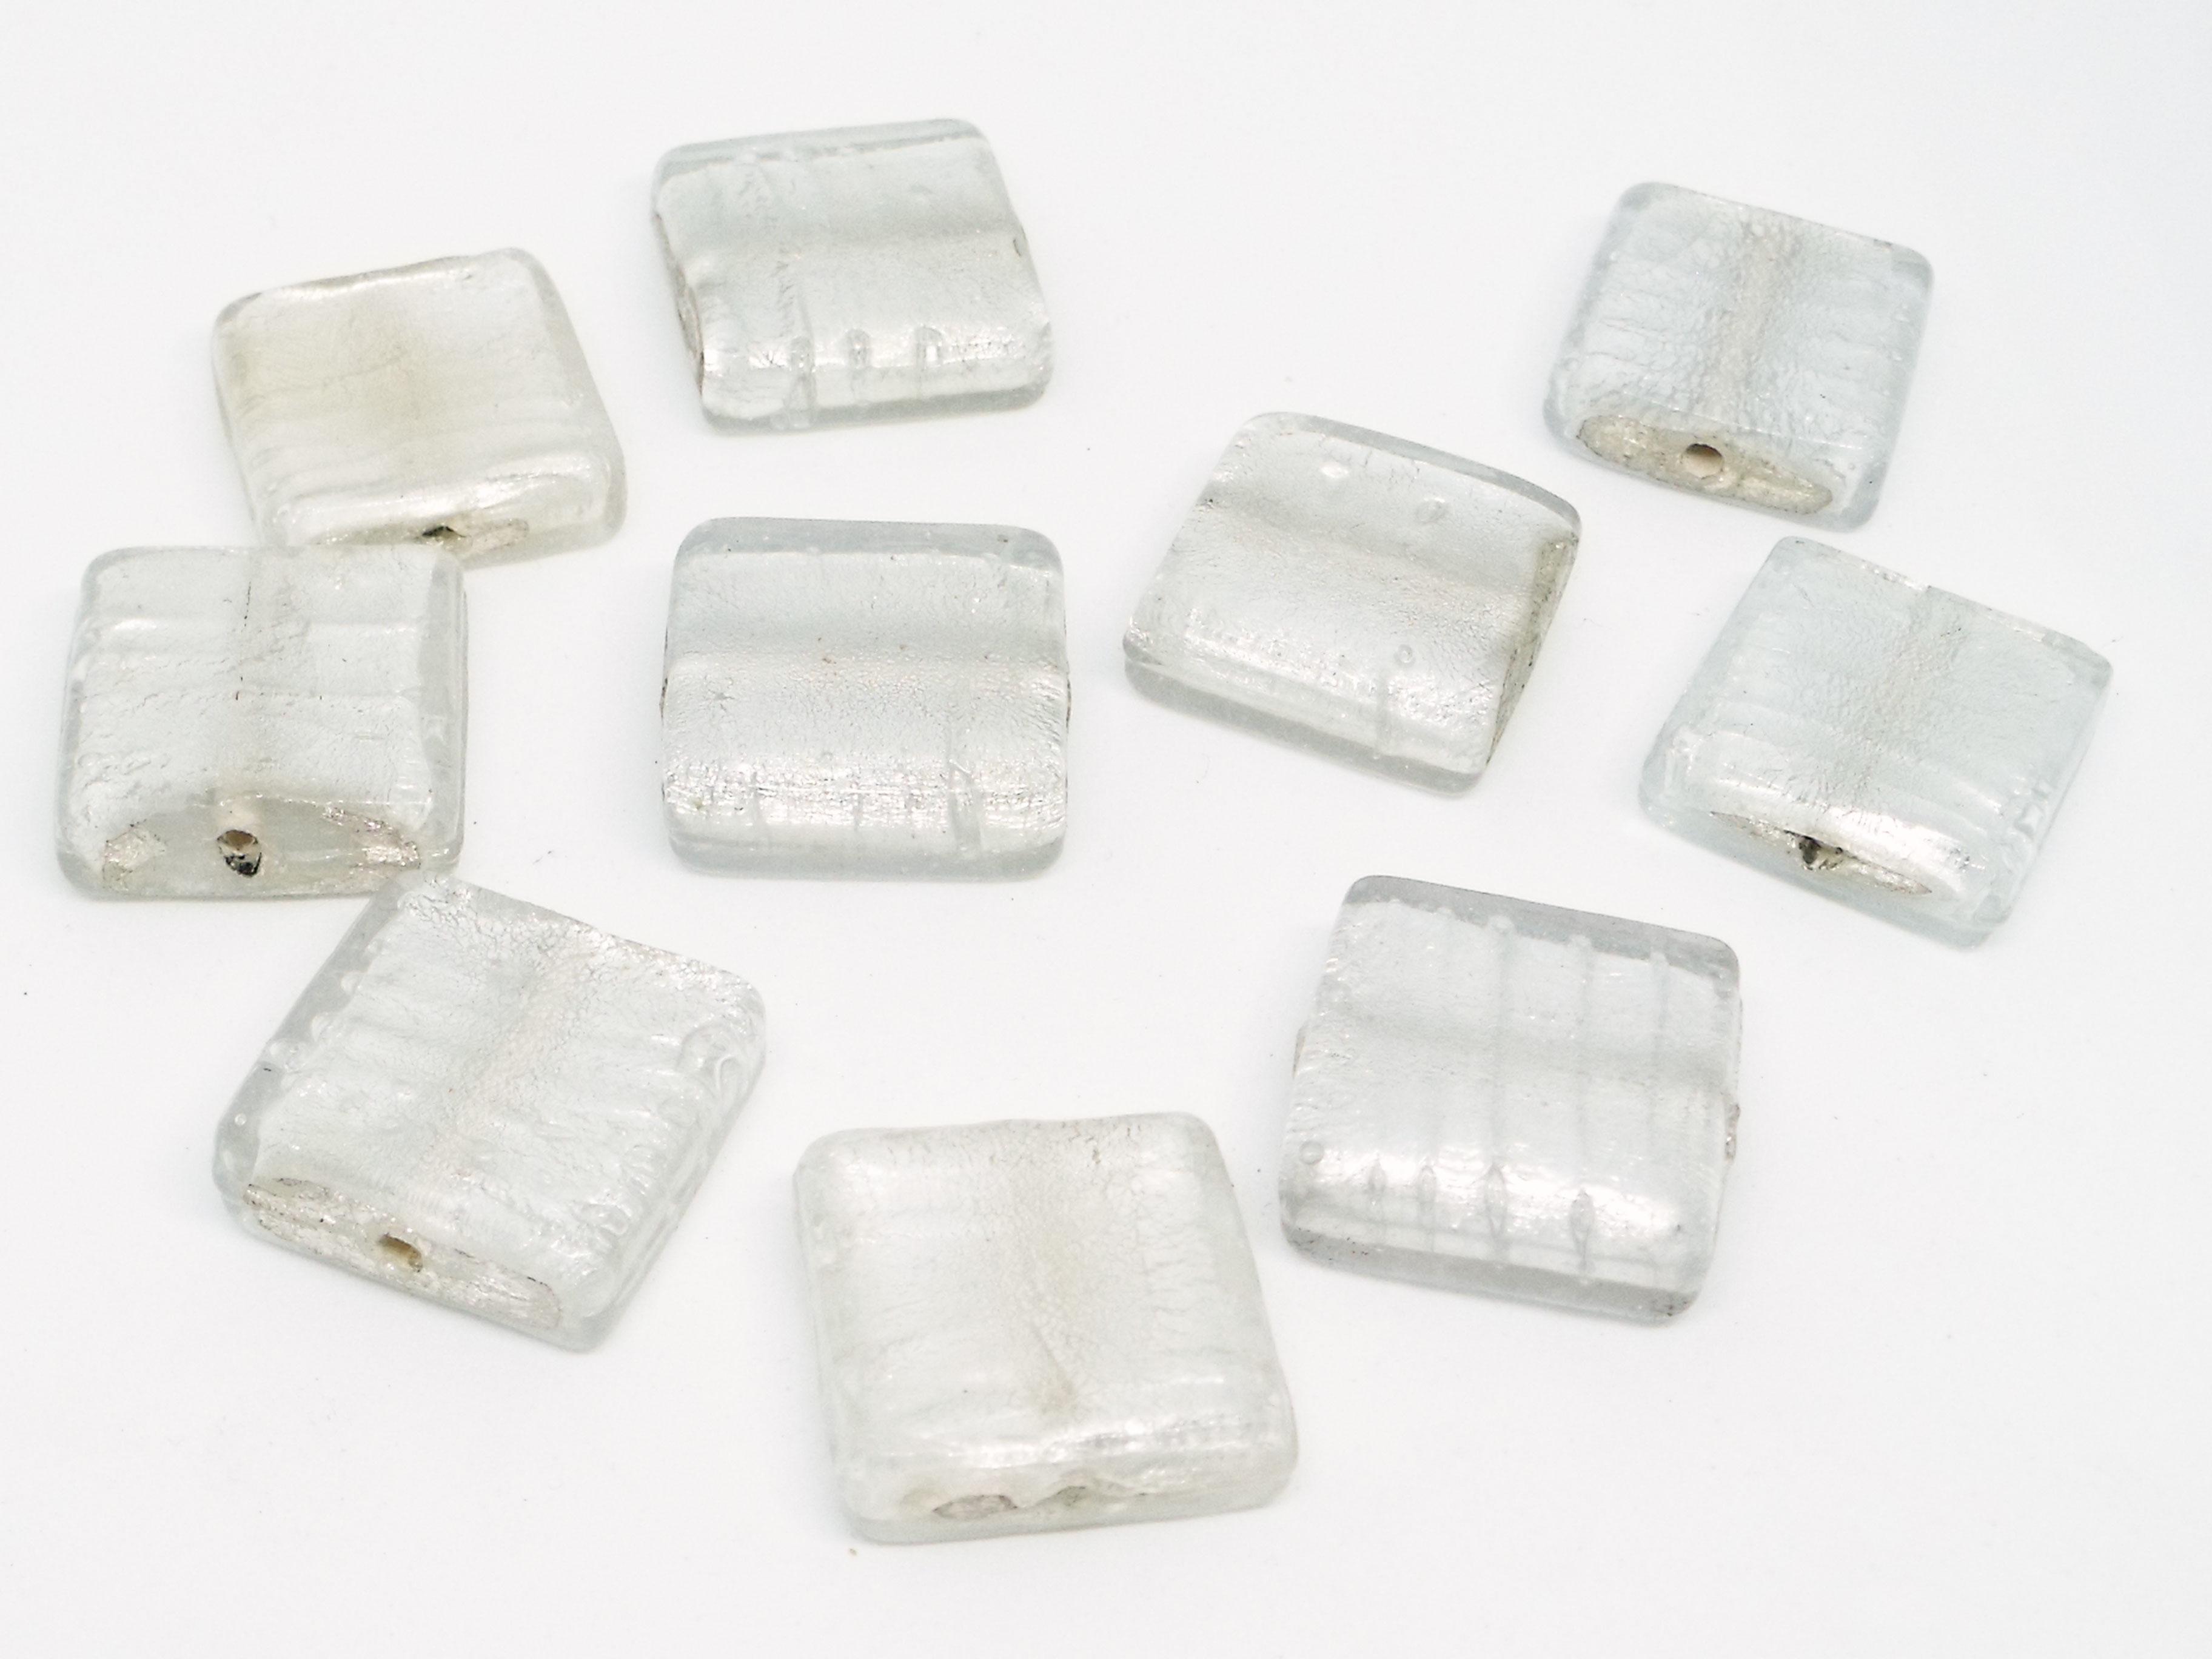 19mm Silver Foiled Square Glass Bead - Crystal